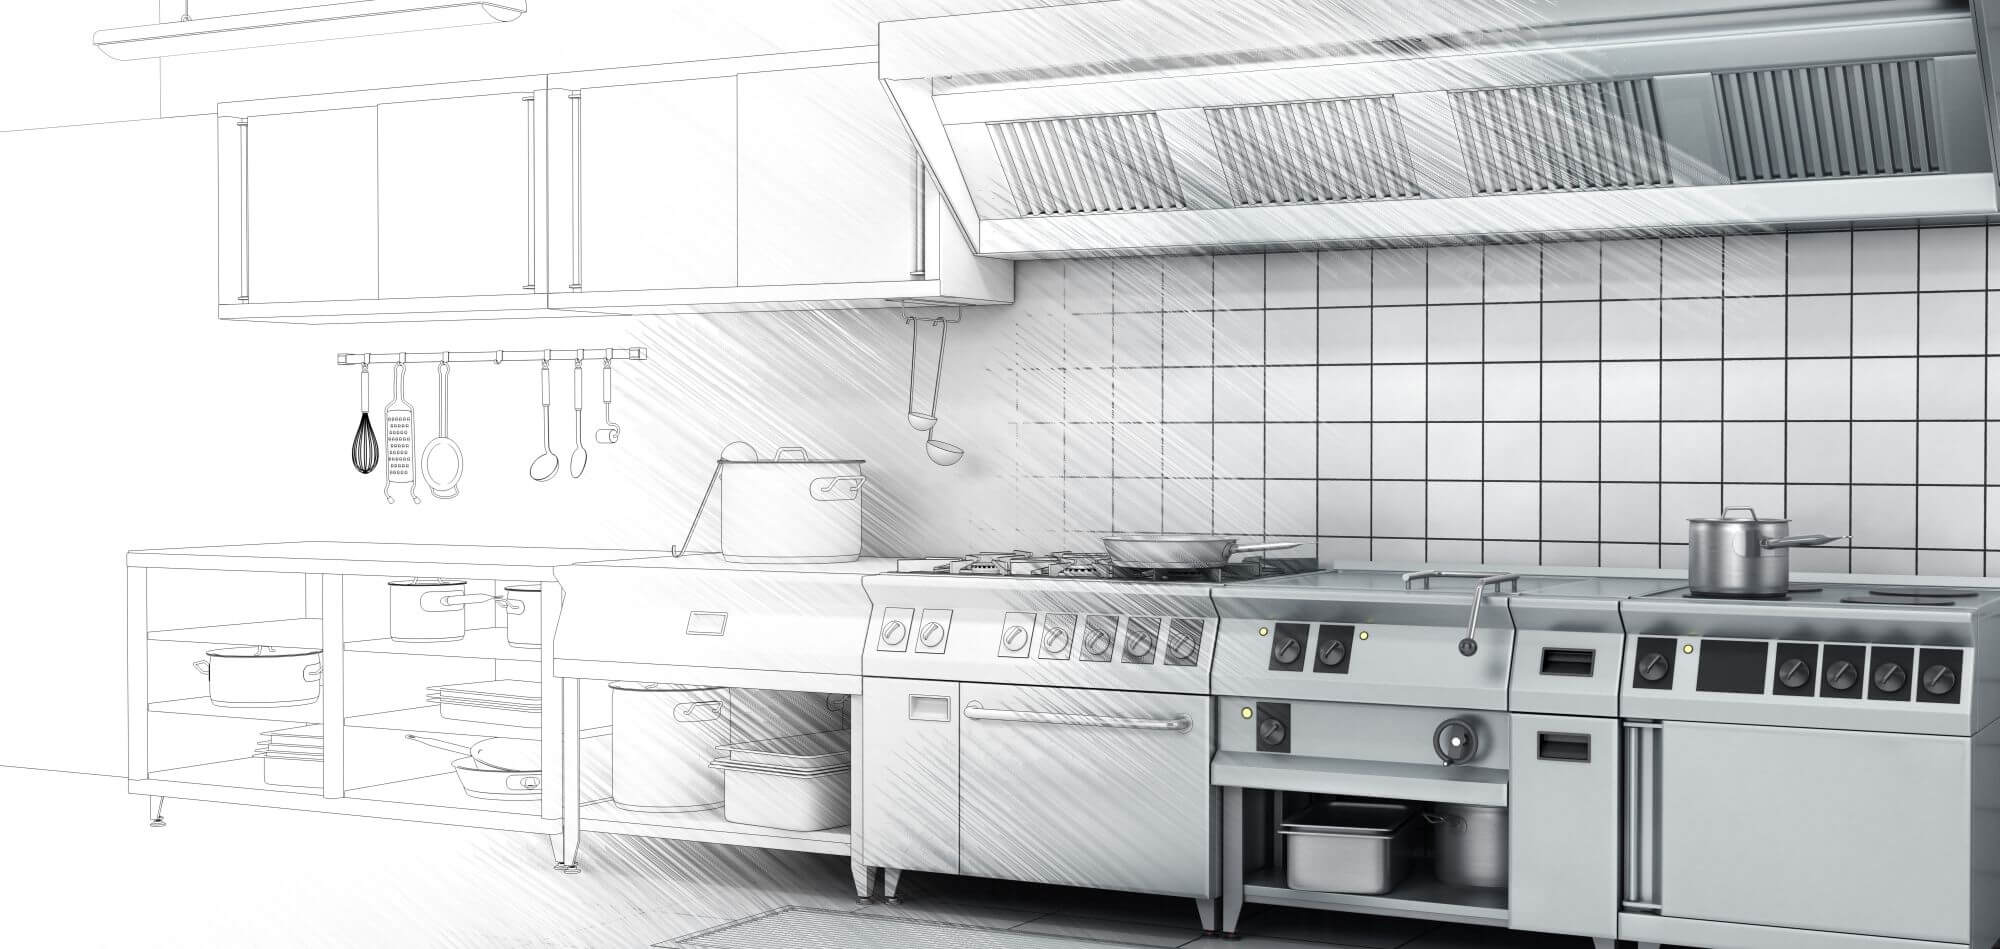 Graphic Showing Commercial Kitchen Sketch fading to Final Design